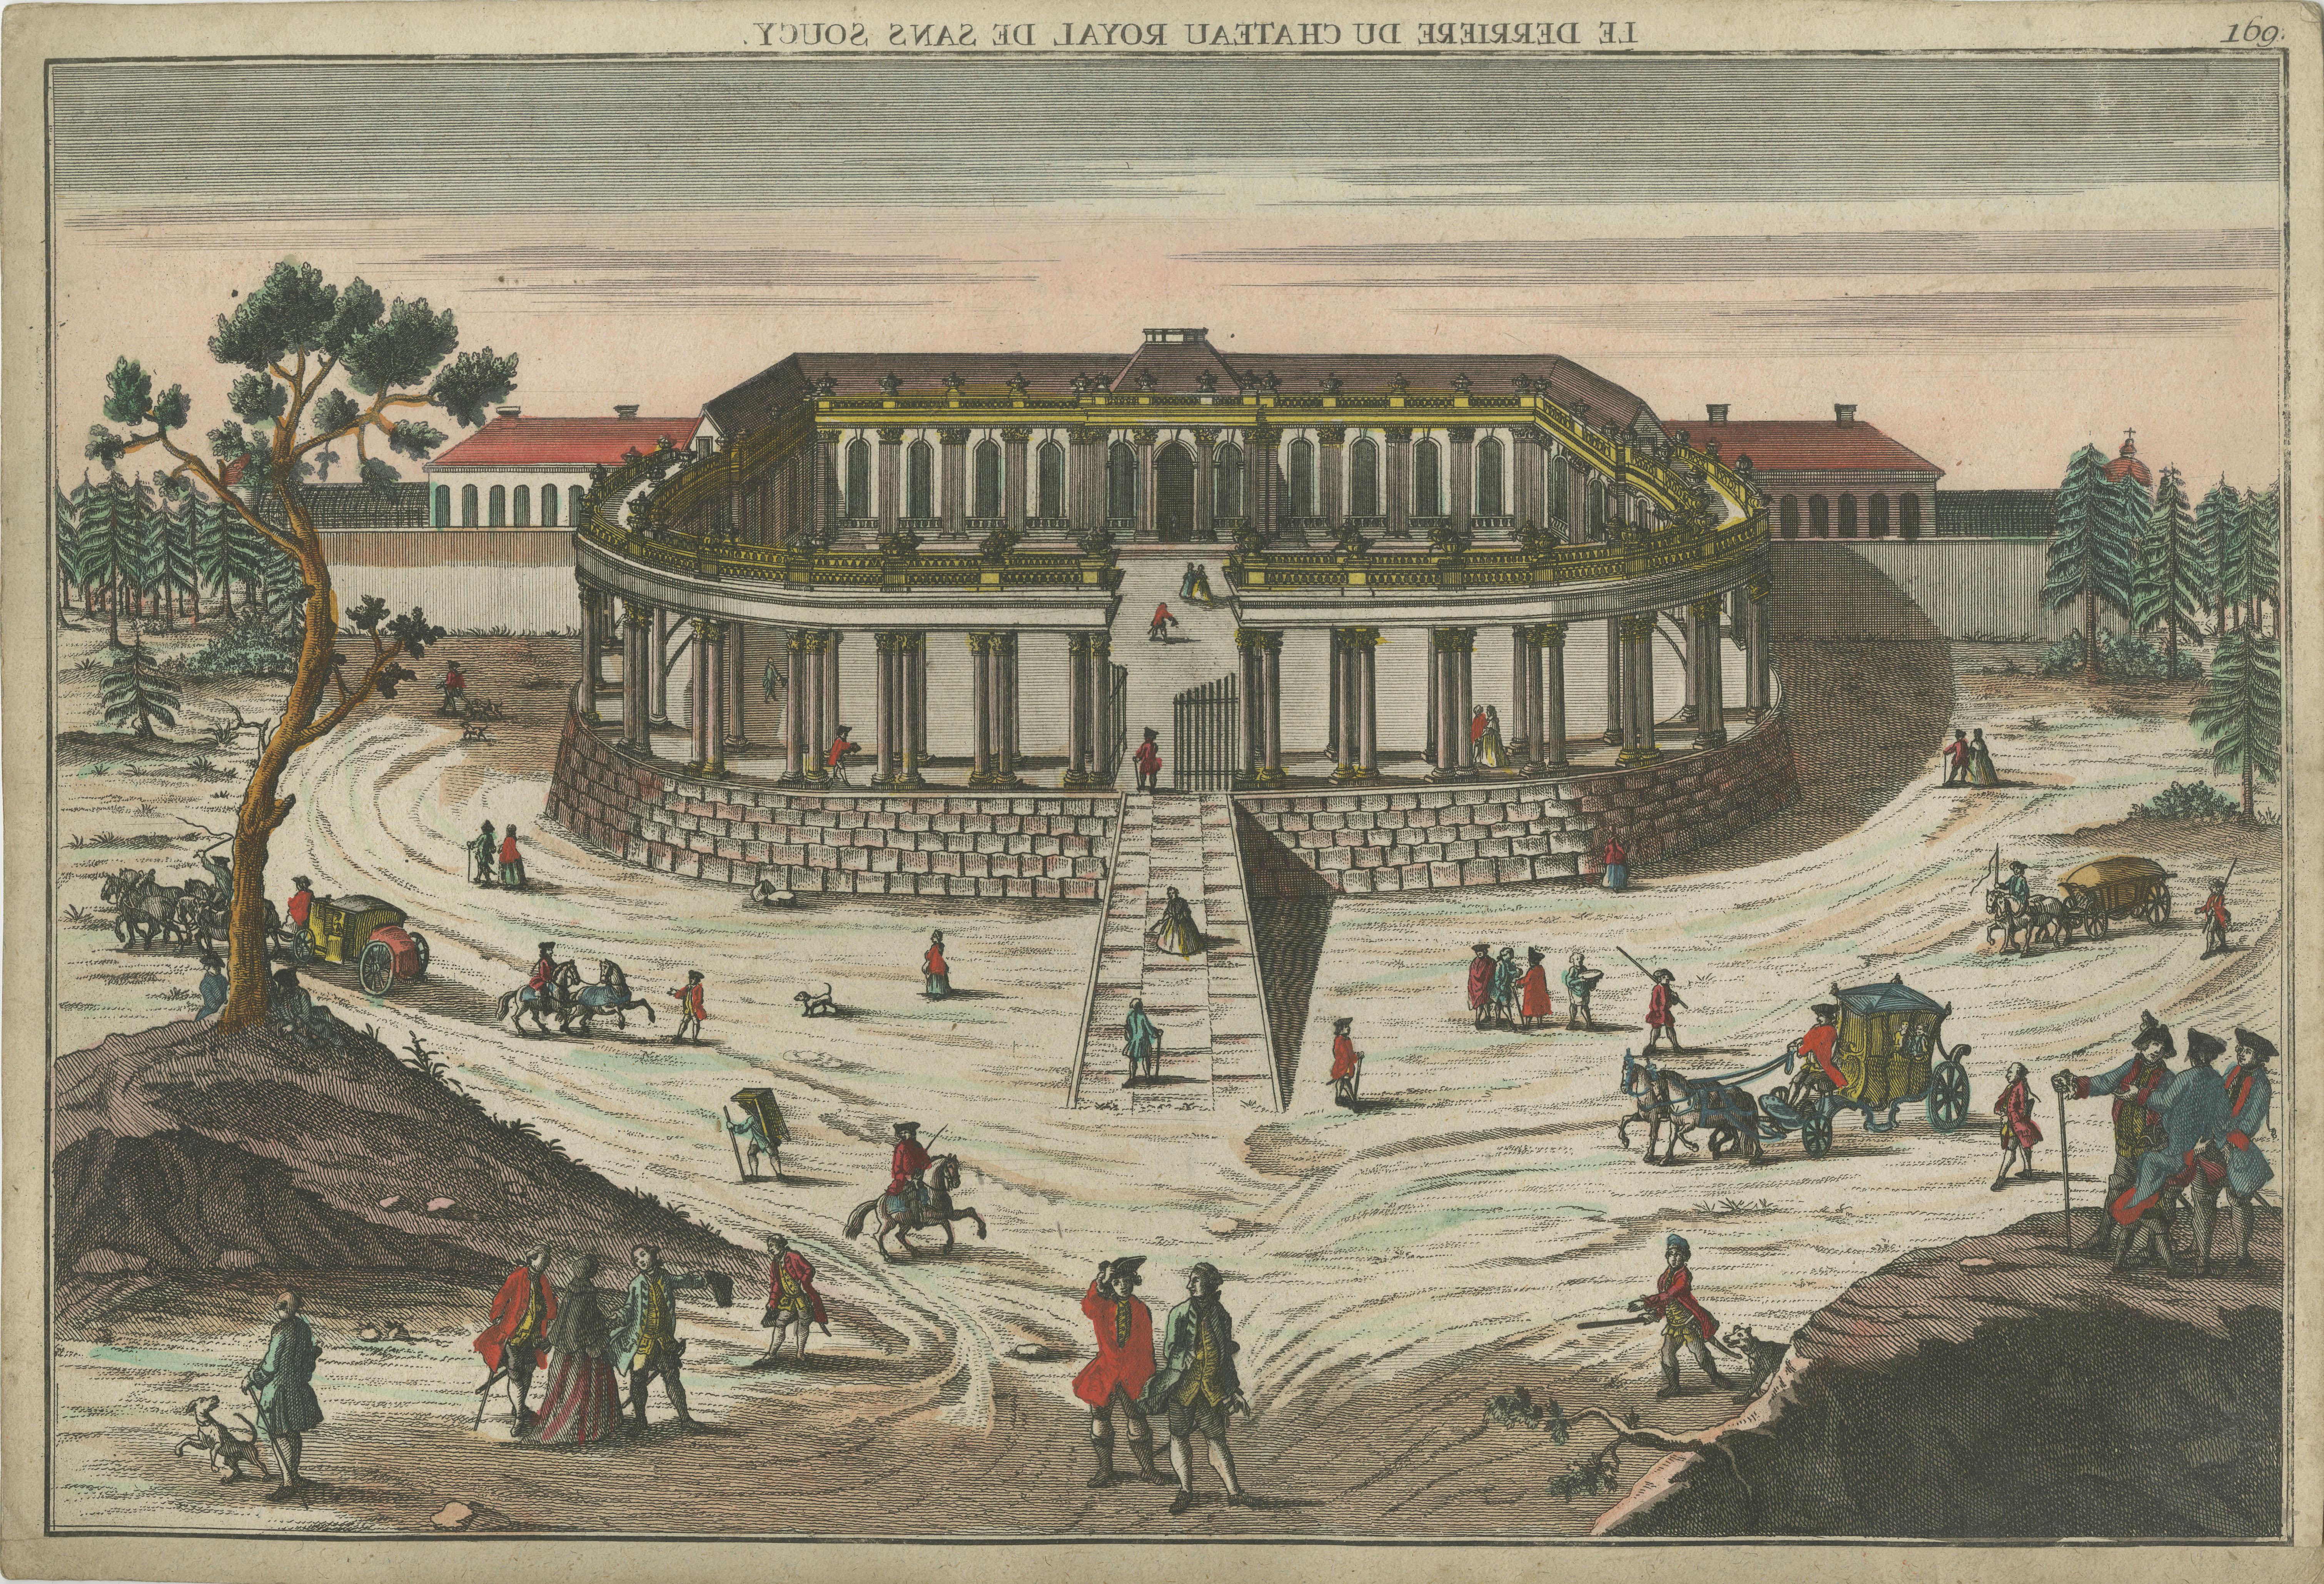 Antique print titled 'Le Derriere du Chateau Royal de sans Soucy'. A vue d'optique of the Sanssouci Palace, Potsdam, the title printed in reverse. The open spaces in the foreground are populated by groups of well-dressed courtiers and servants, and